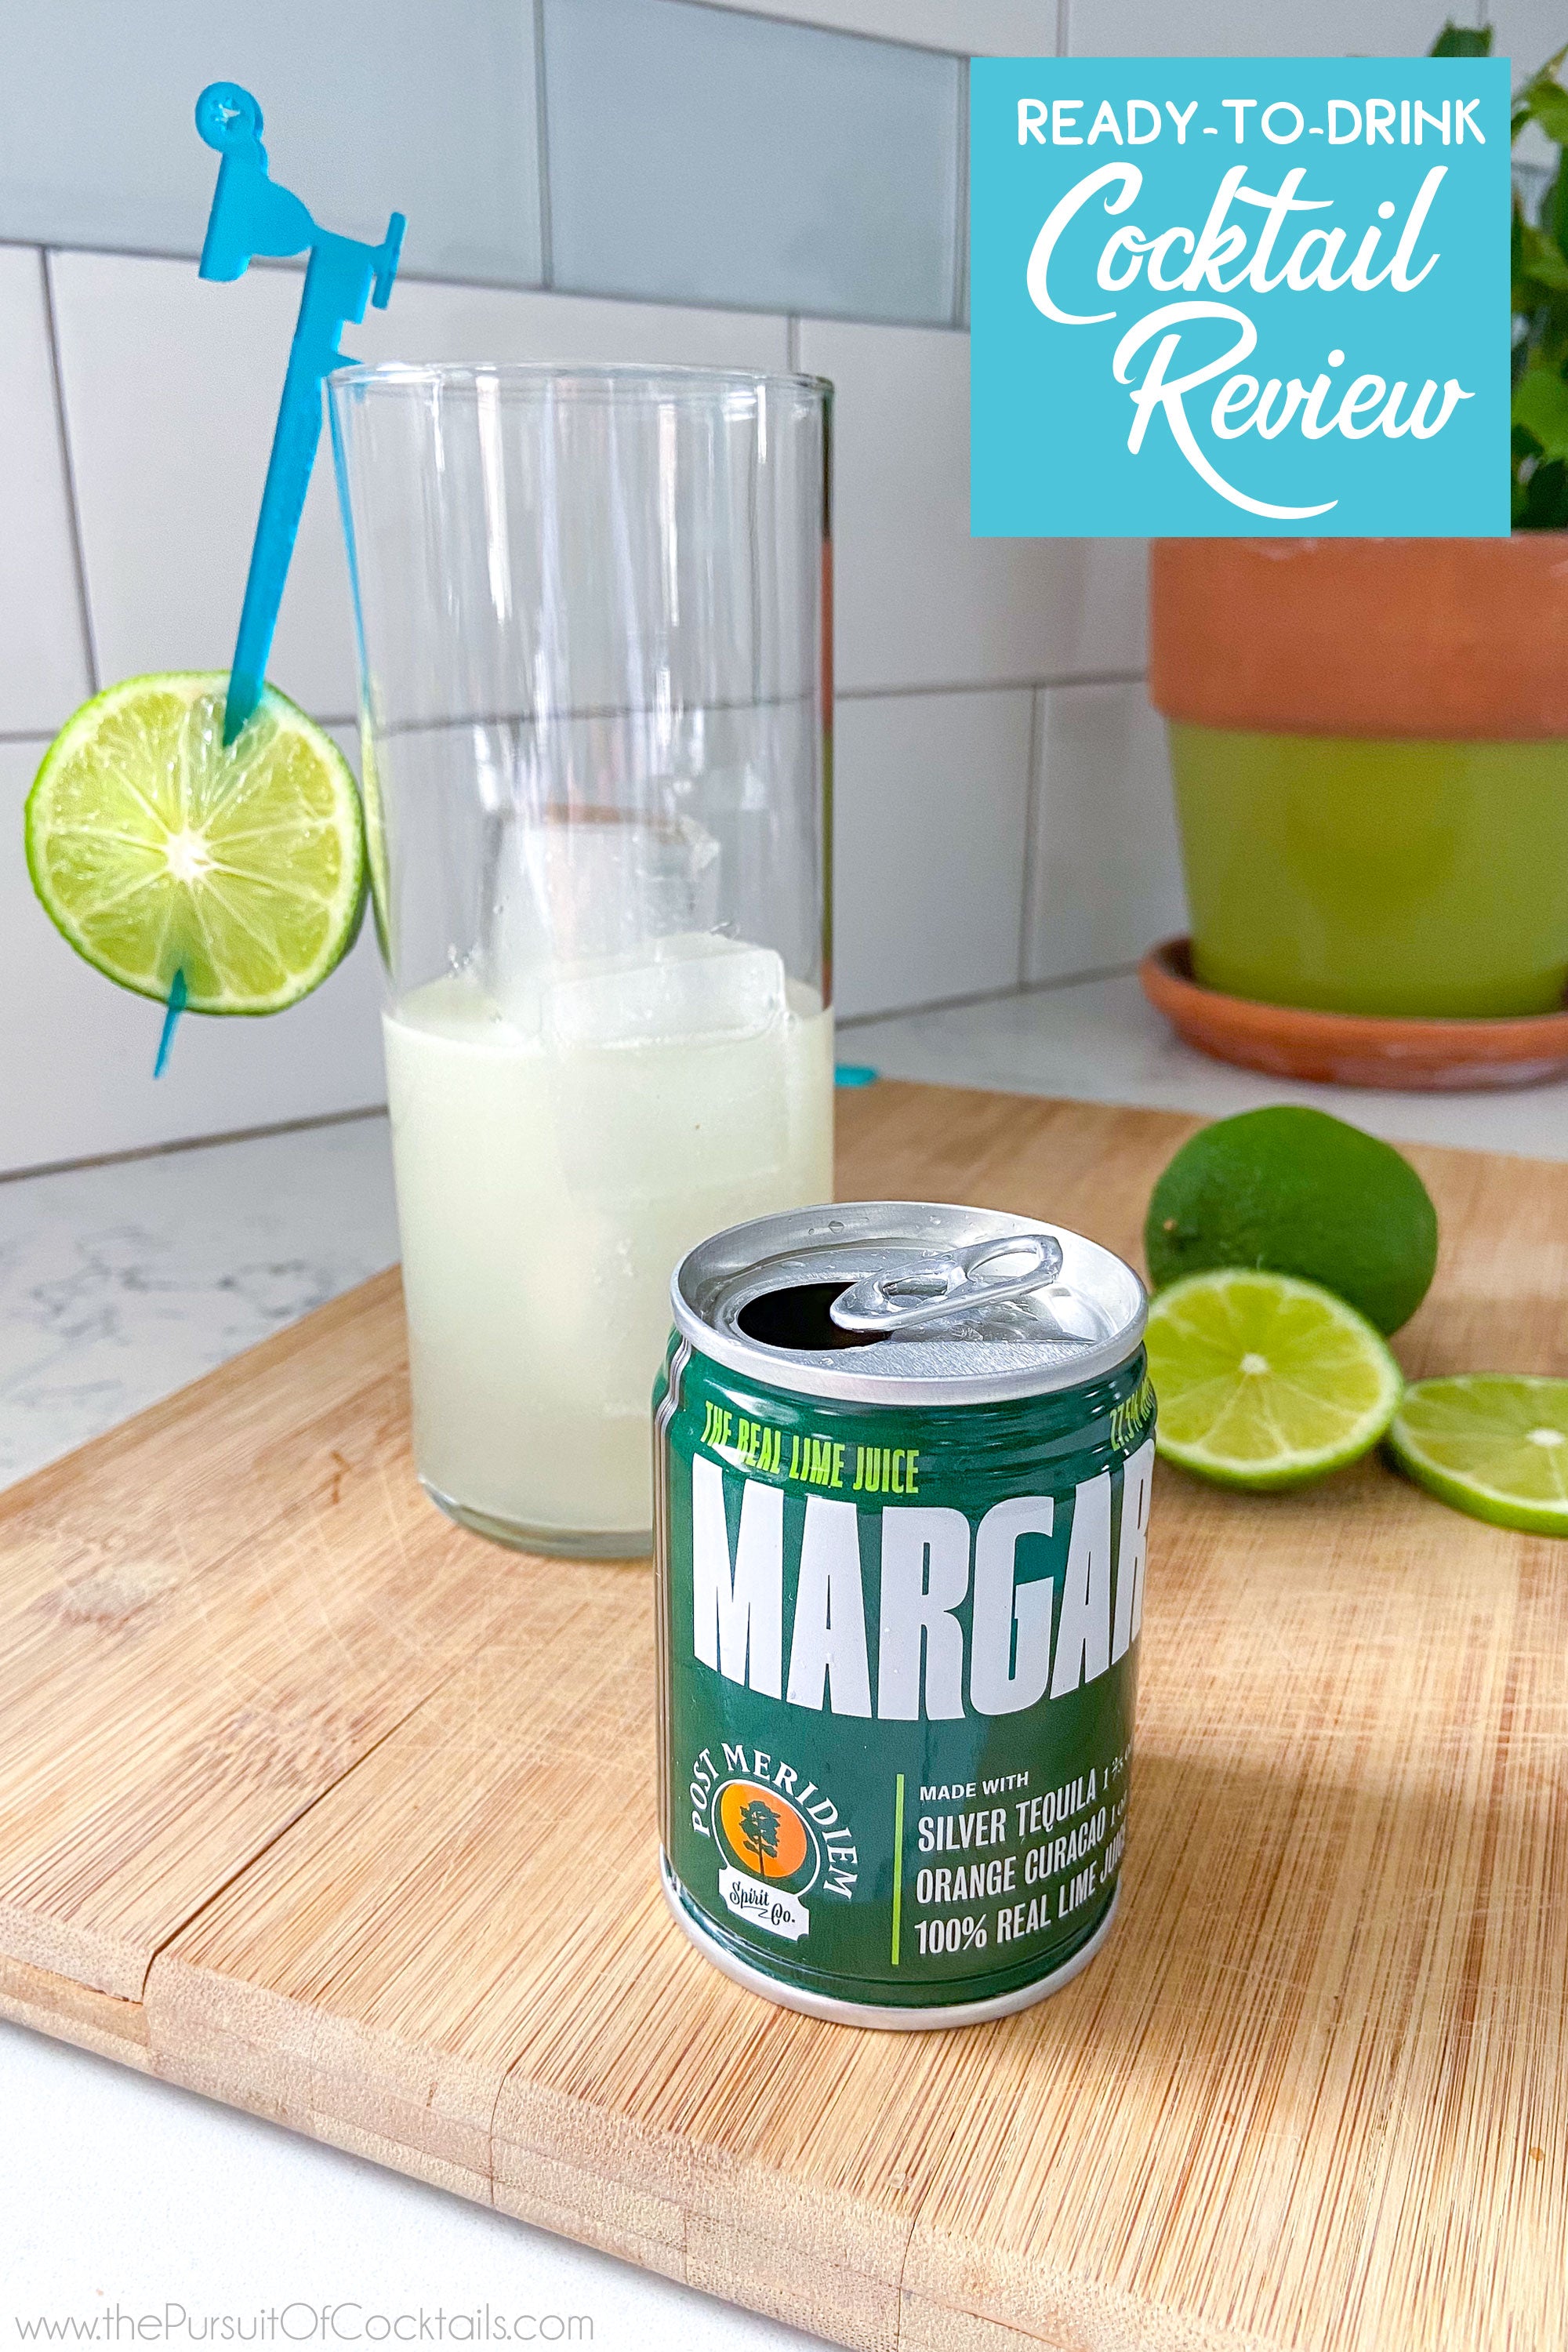 Ready-to-drink margarita review of Post Merideim canned cocktail by The Pursuit of Cocktails